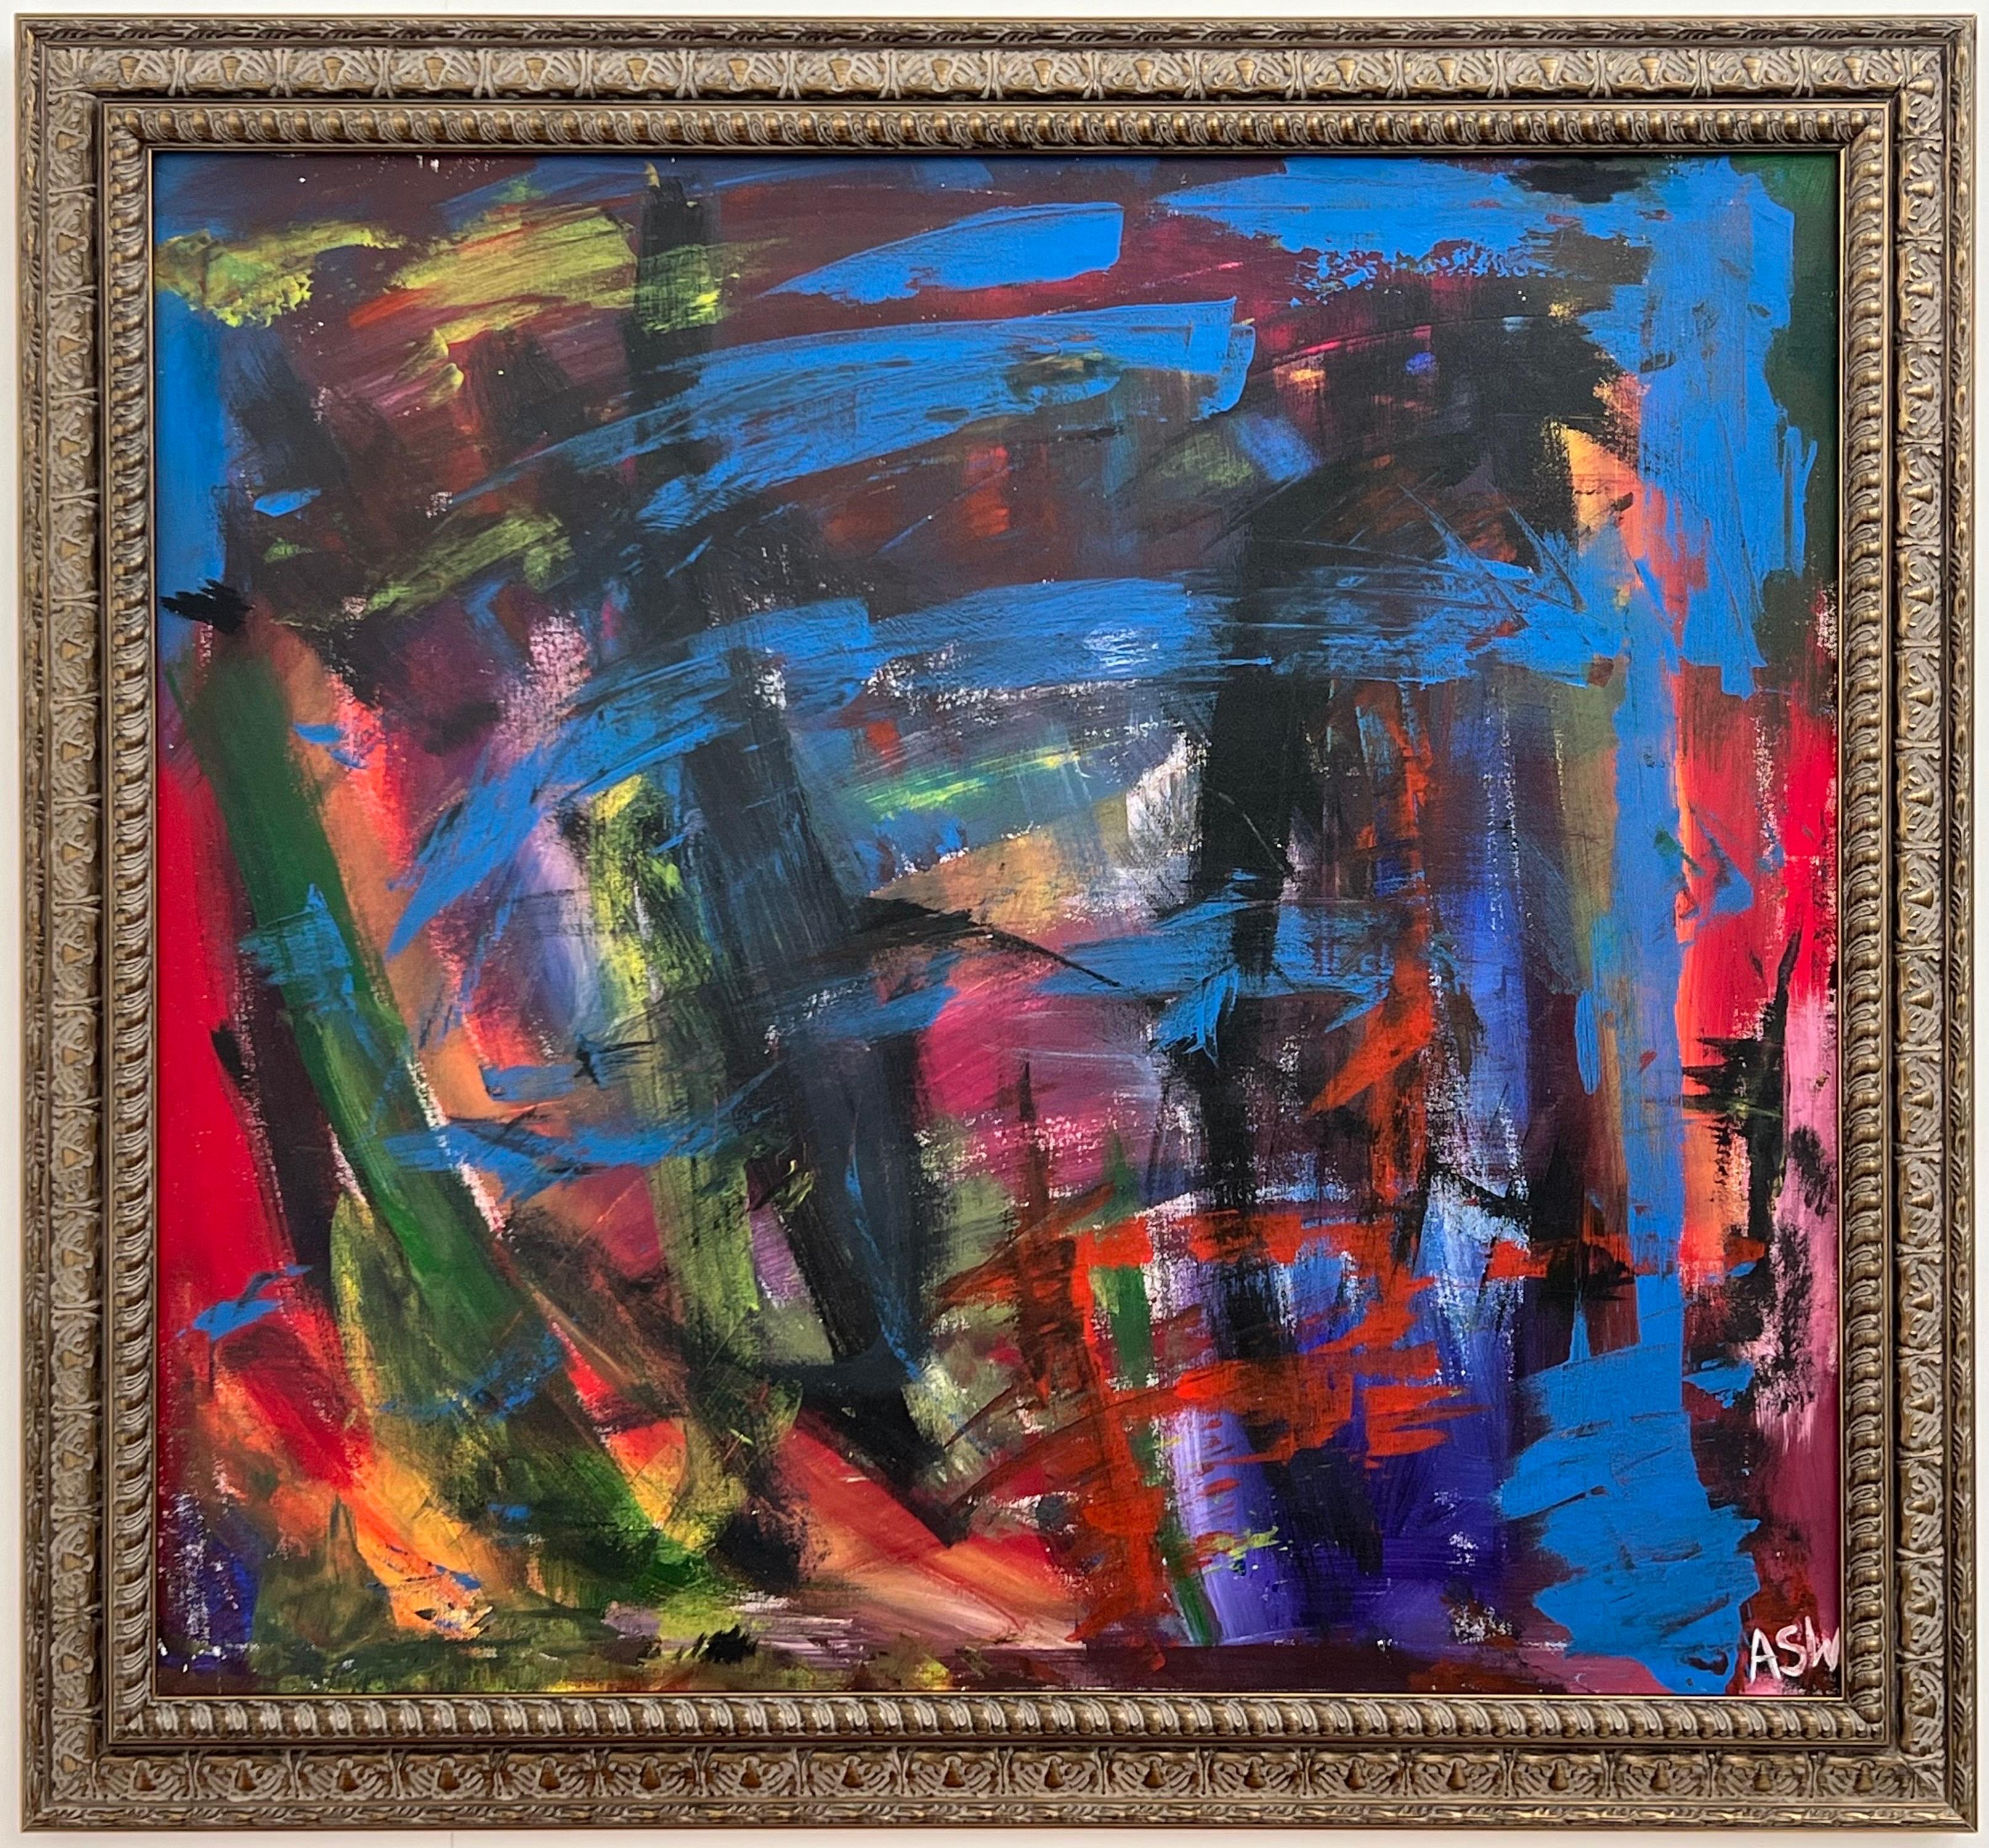 Blue, Red & Green Abstract Expressionist Painting, entitled 'Tropical City #1', an extremely rare early work from leading British Contemporary Artist, Angela Wakefield. This colourful & energetic artwork is from an intense body of gestural abstract